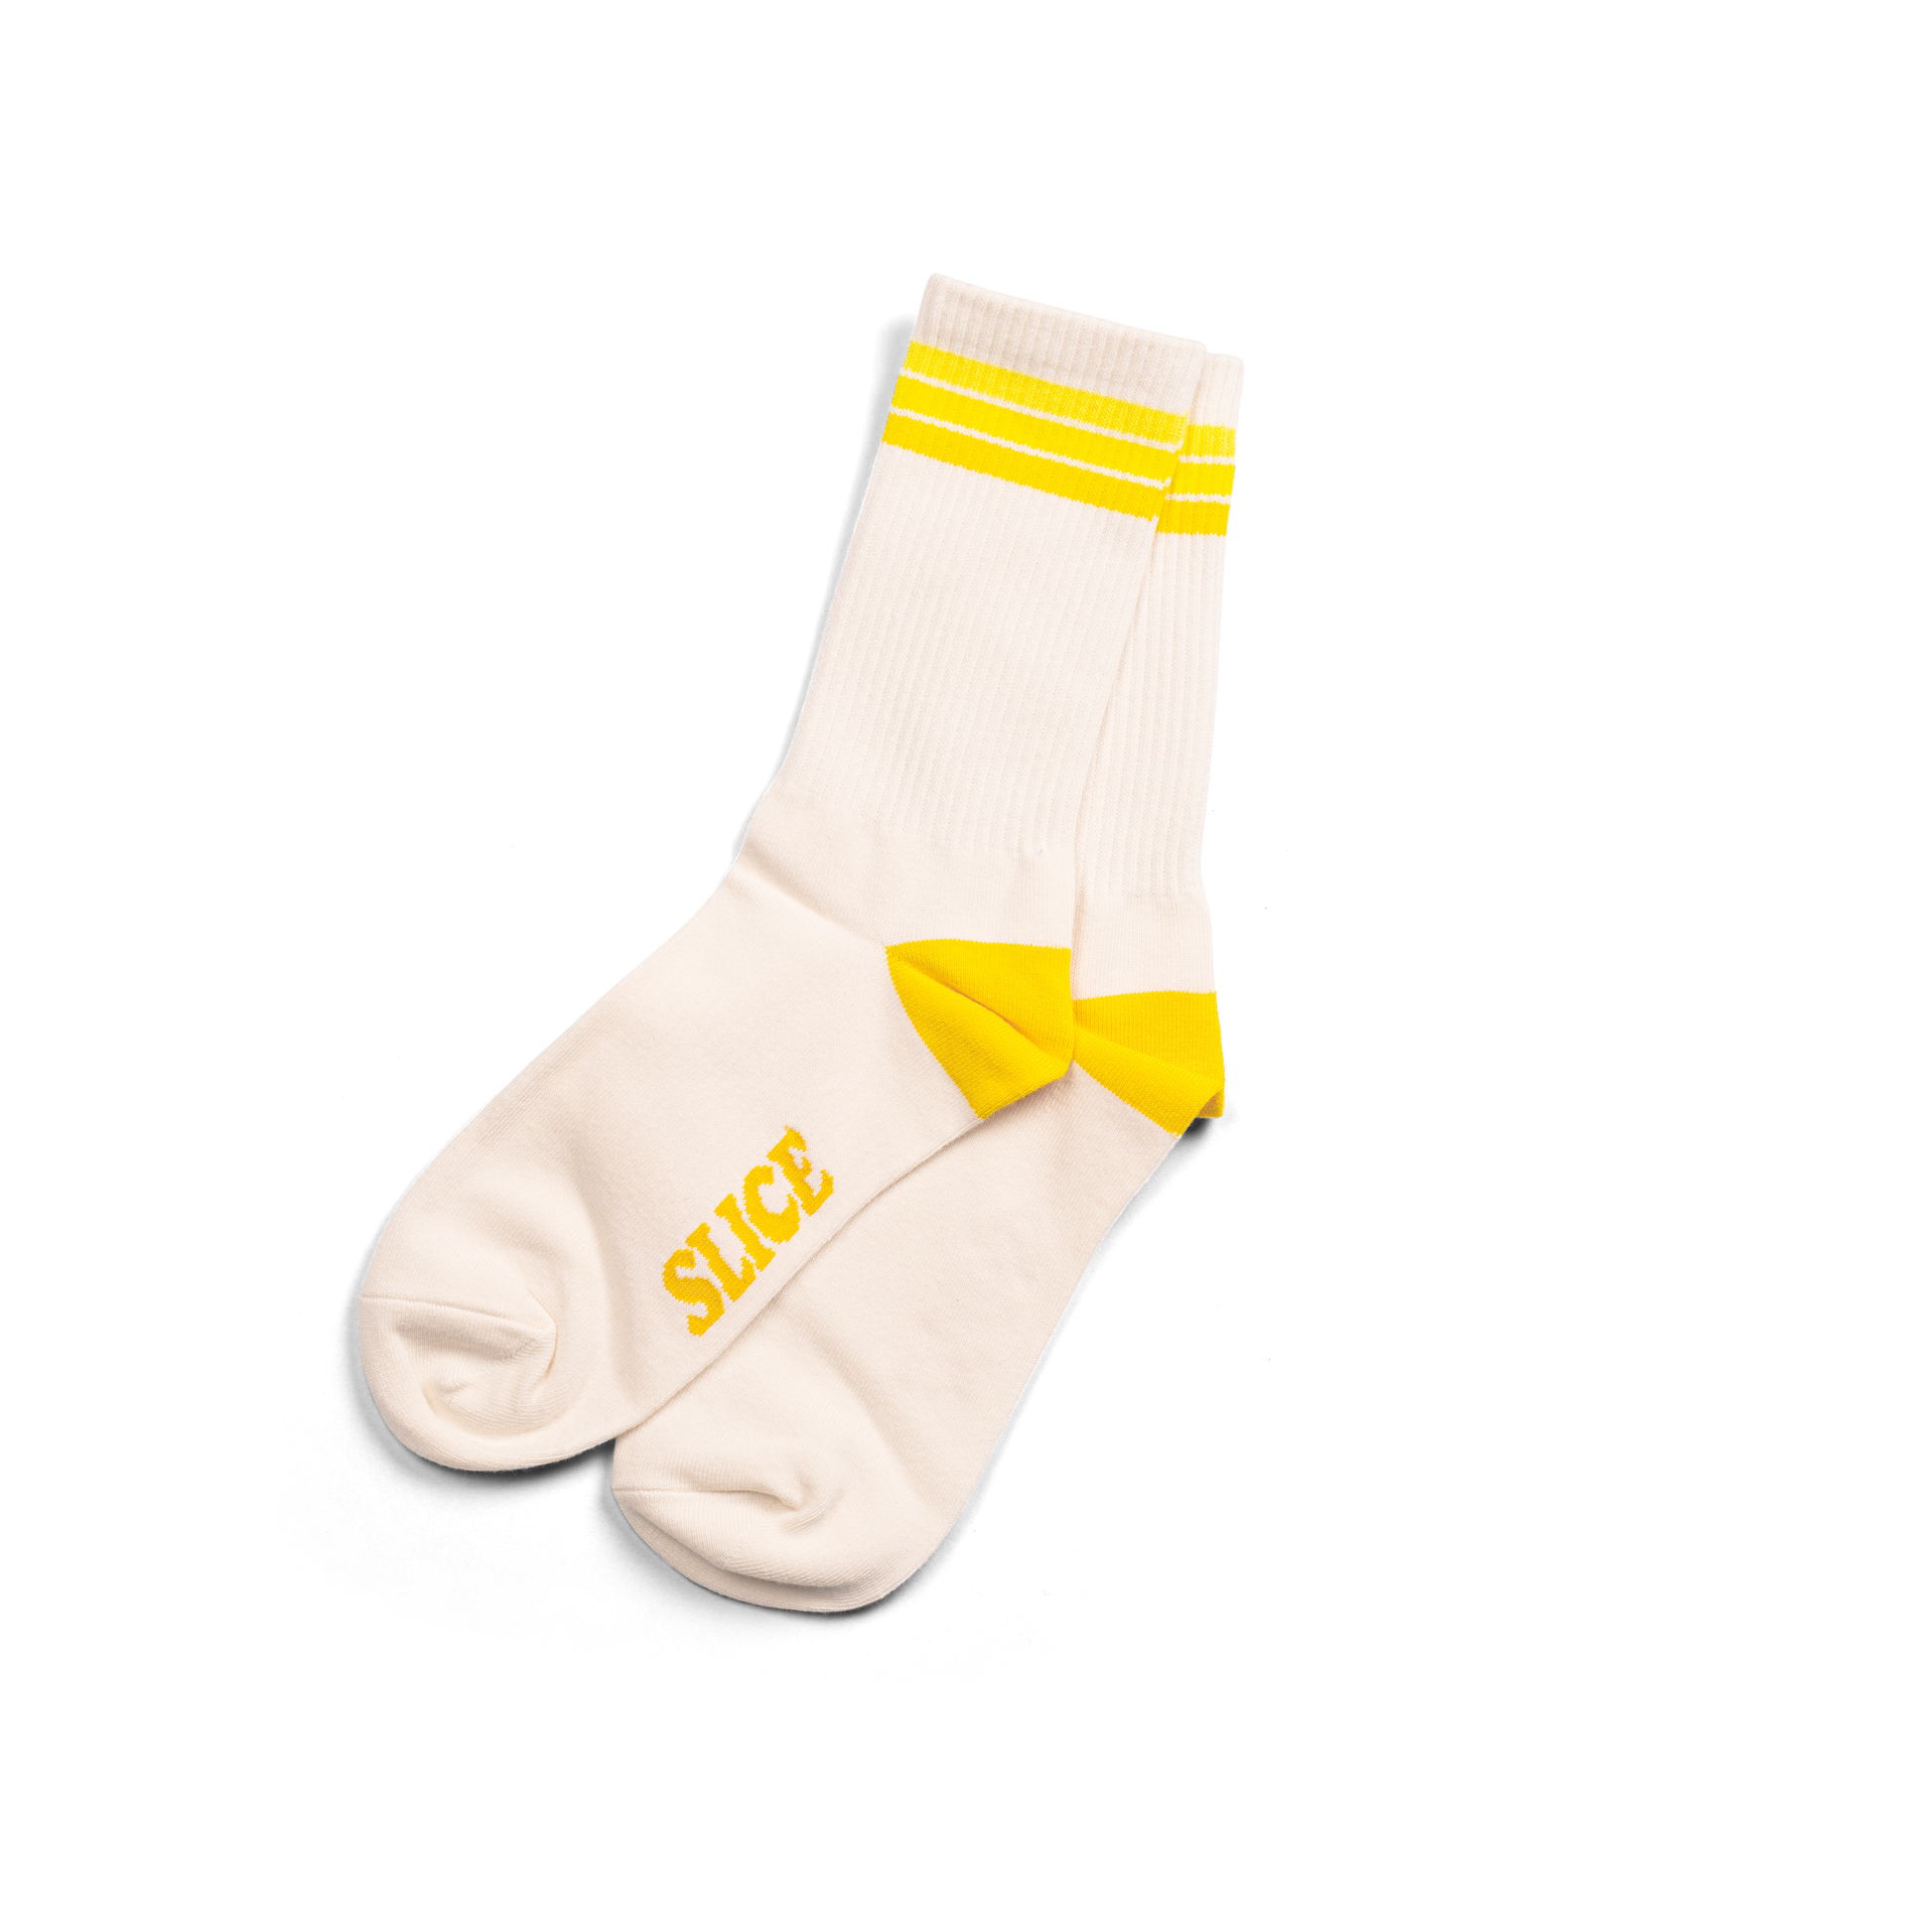 Golf sports socks in white with yellow stripes.